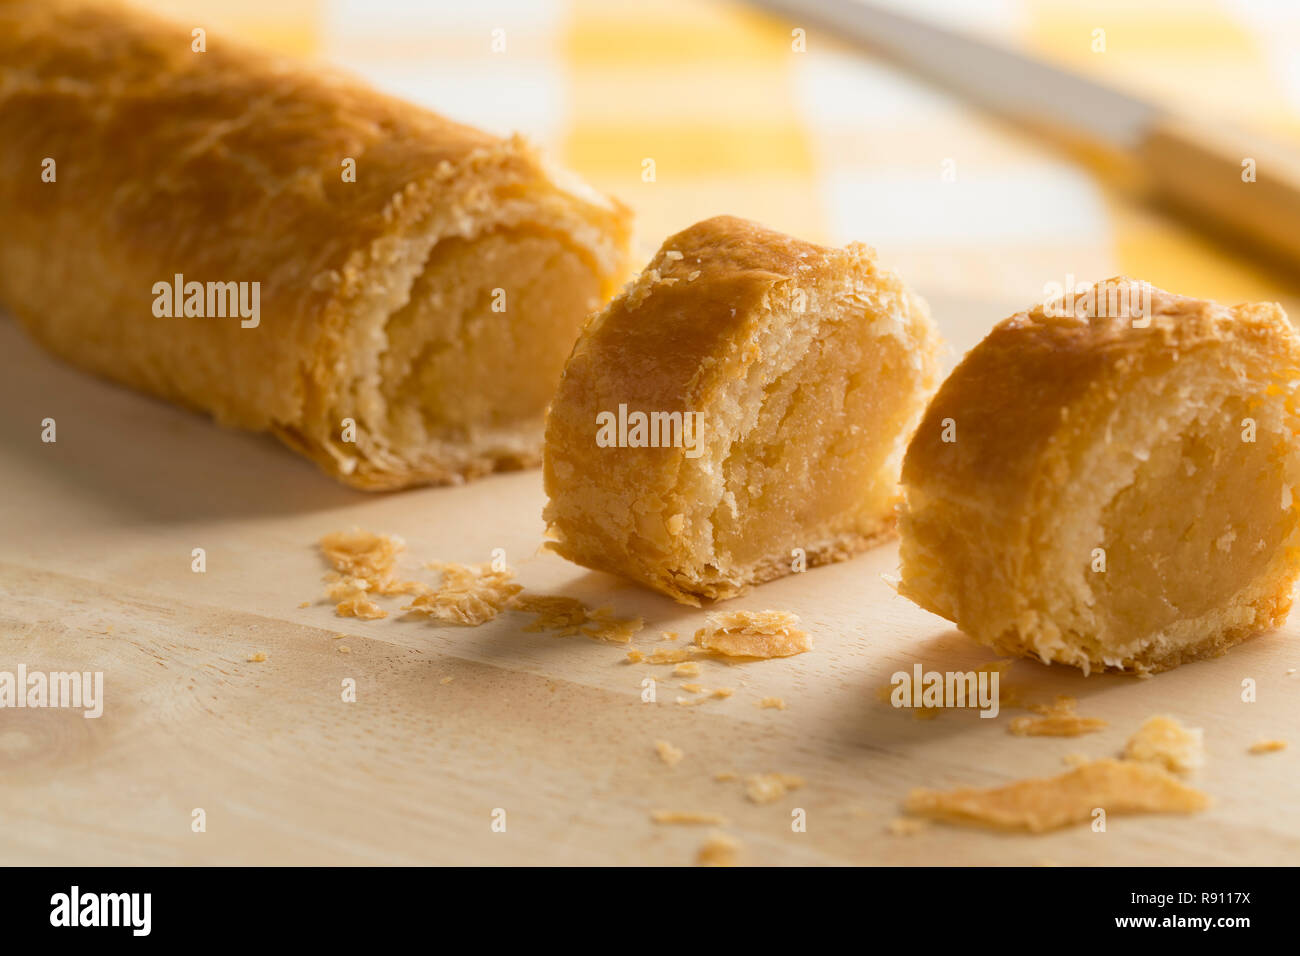 Dutch pastry with almond filling close up special voor Sinterklaas and christmas Stock Photo